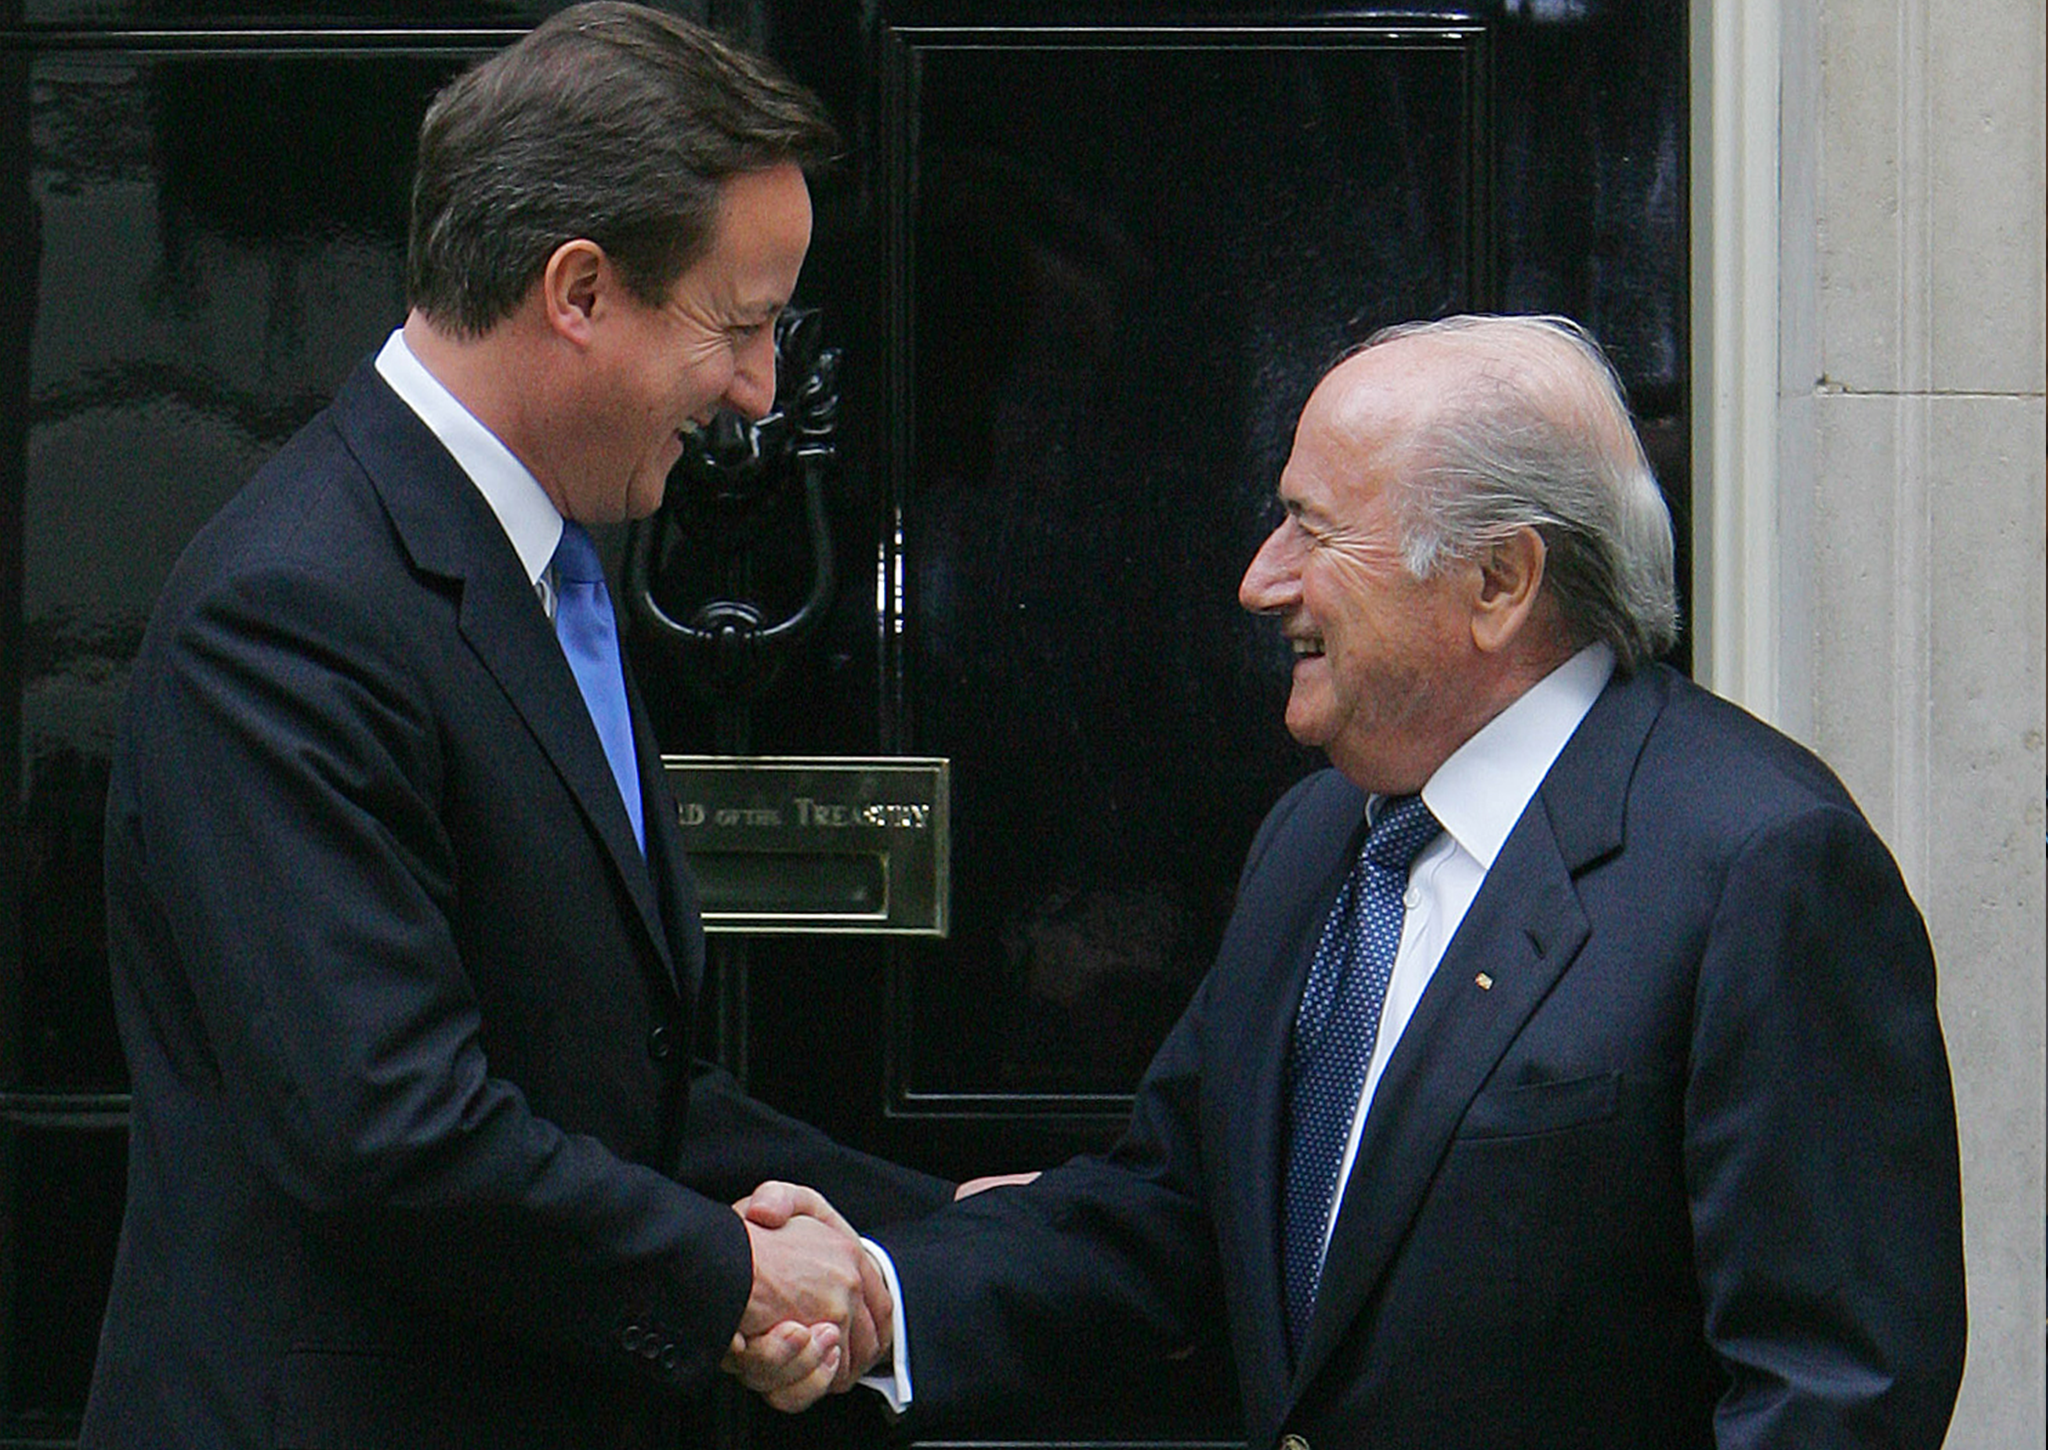 David Cameron and Sepp Blatter greet each other outside Number 10 in 2010